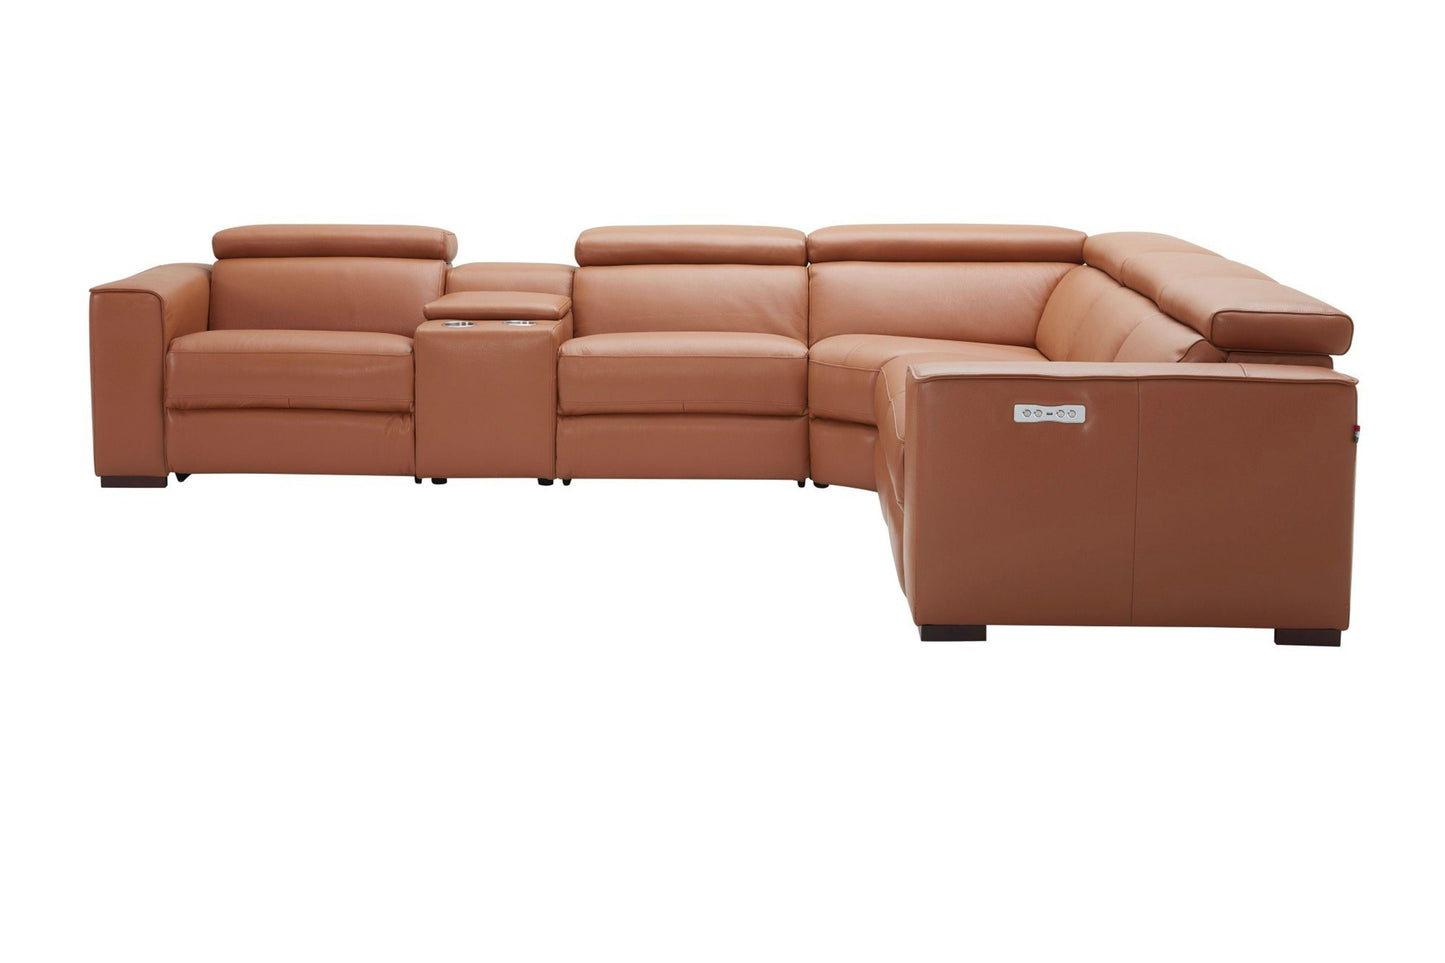 Picasso 6Pc Motion Sectional In Caramel - Venini Furniture 